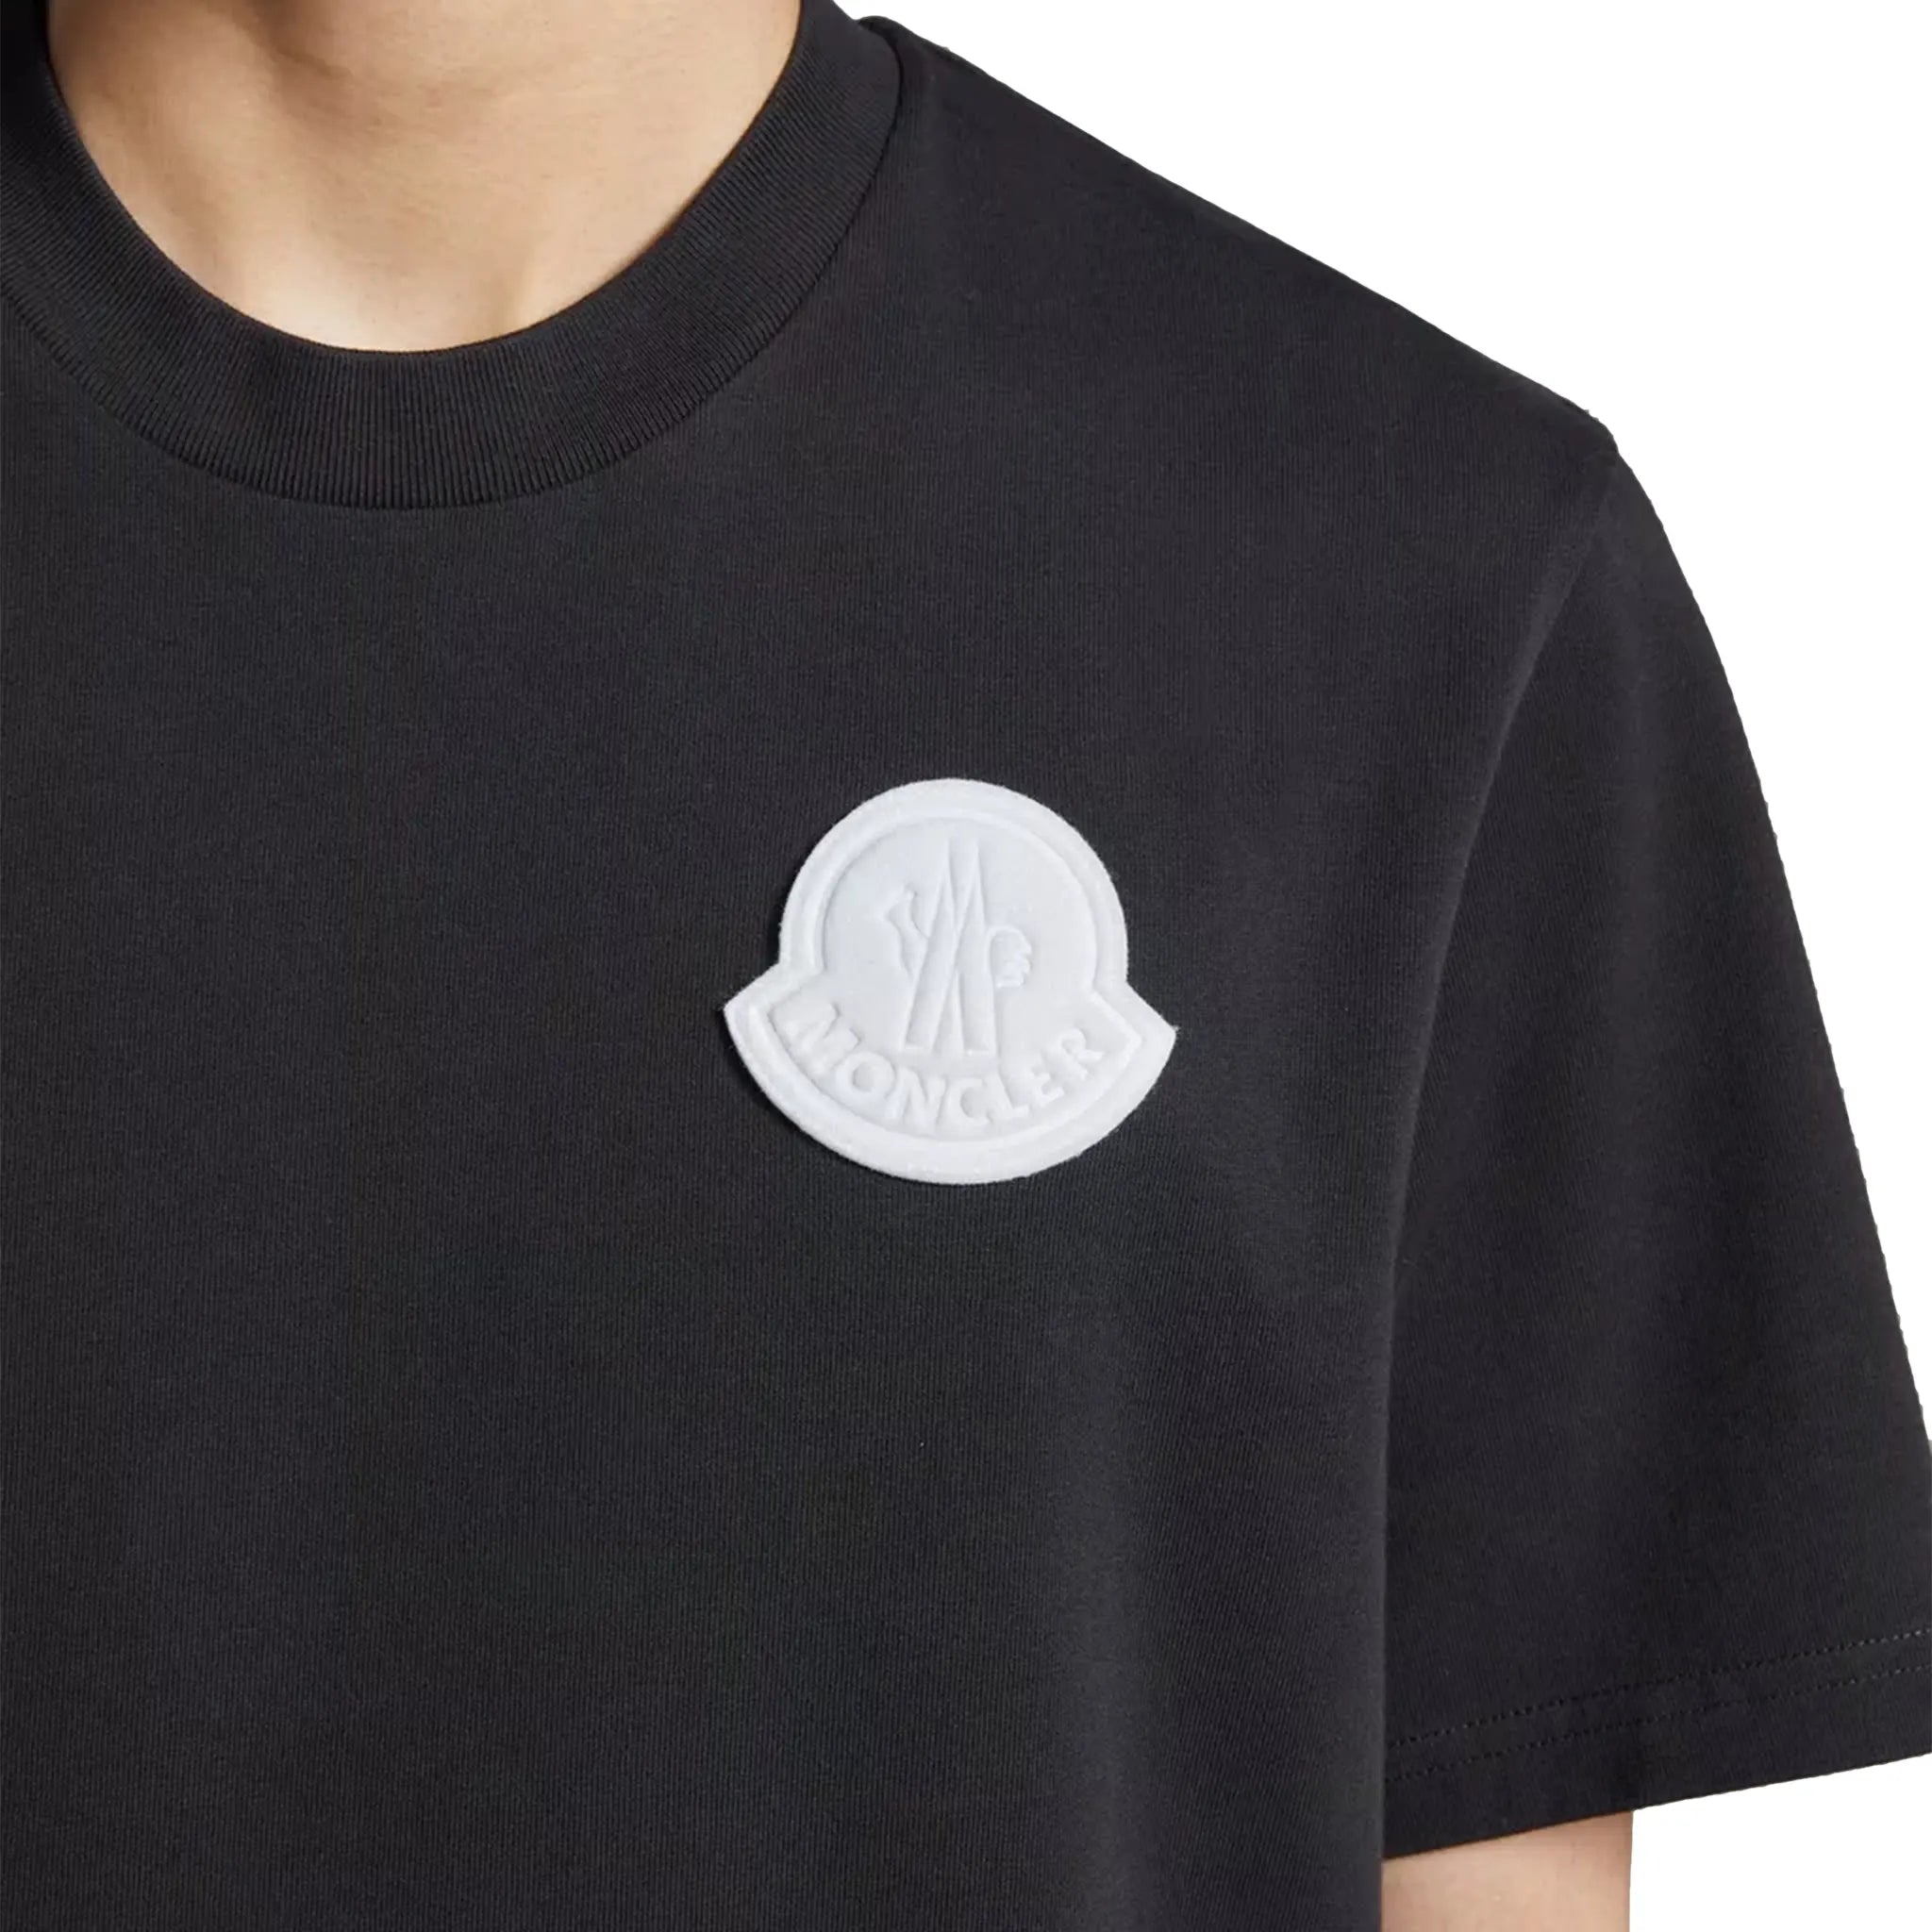 Detail view of Moncler SN44 Patched Logo Short Sleeve Charcoal T Shirt J10918C0004583927998